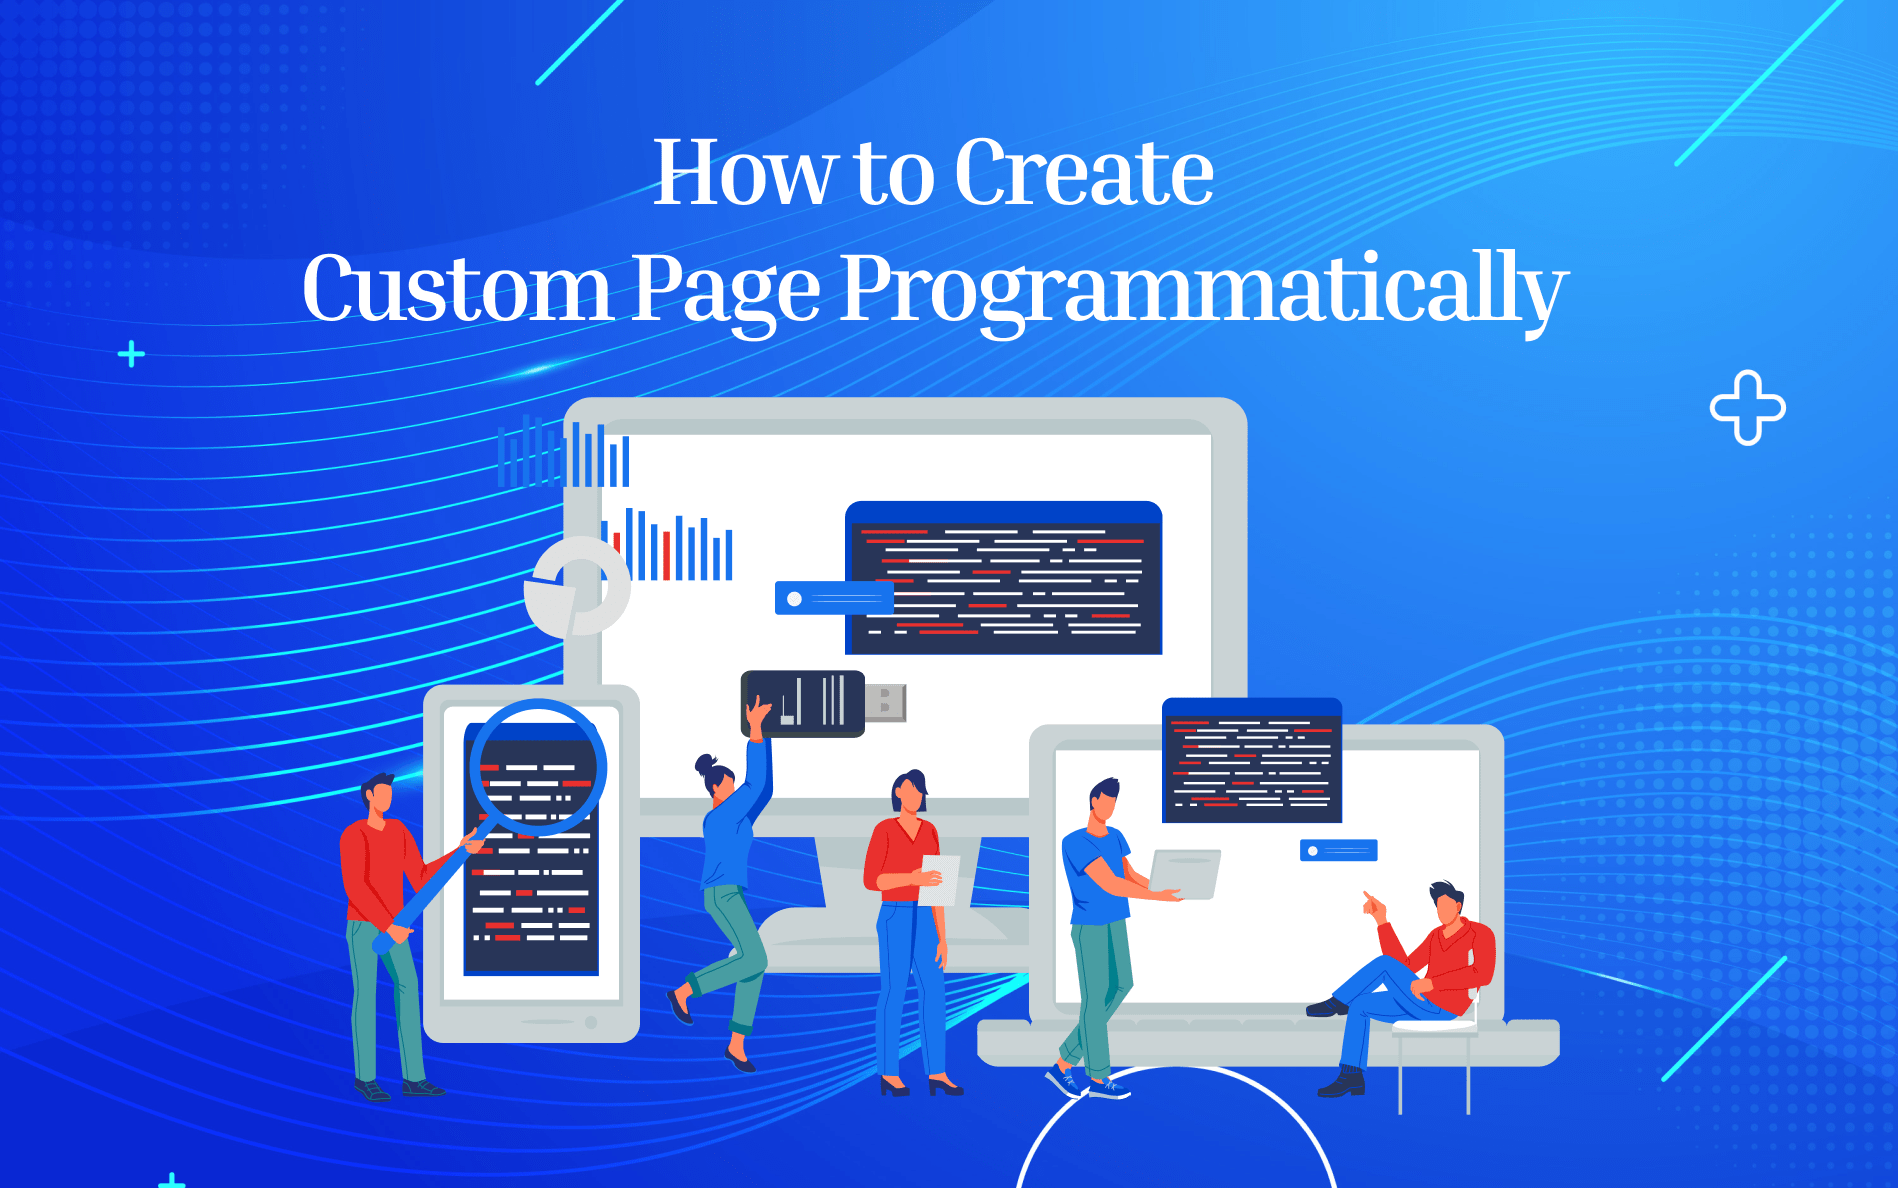 How to Create Custom Page Programmatically